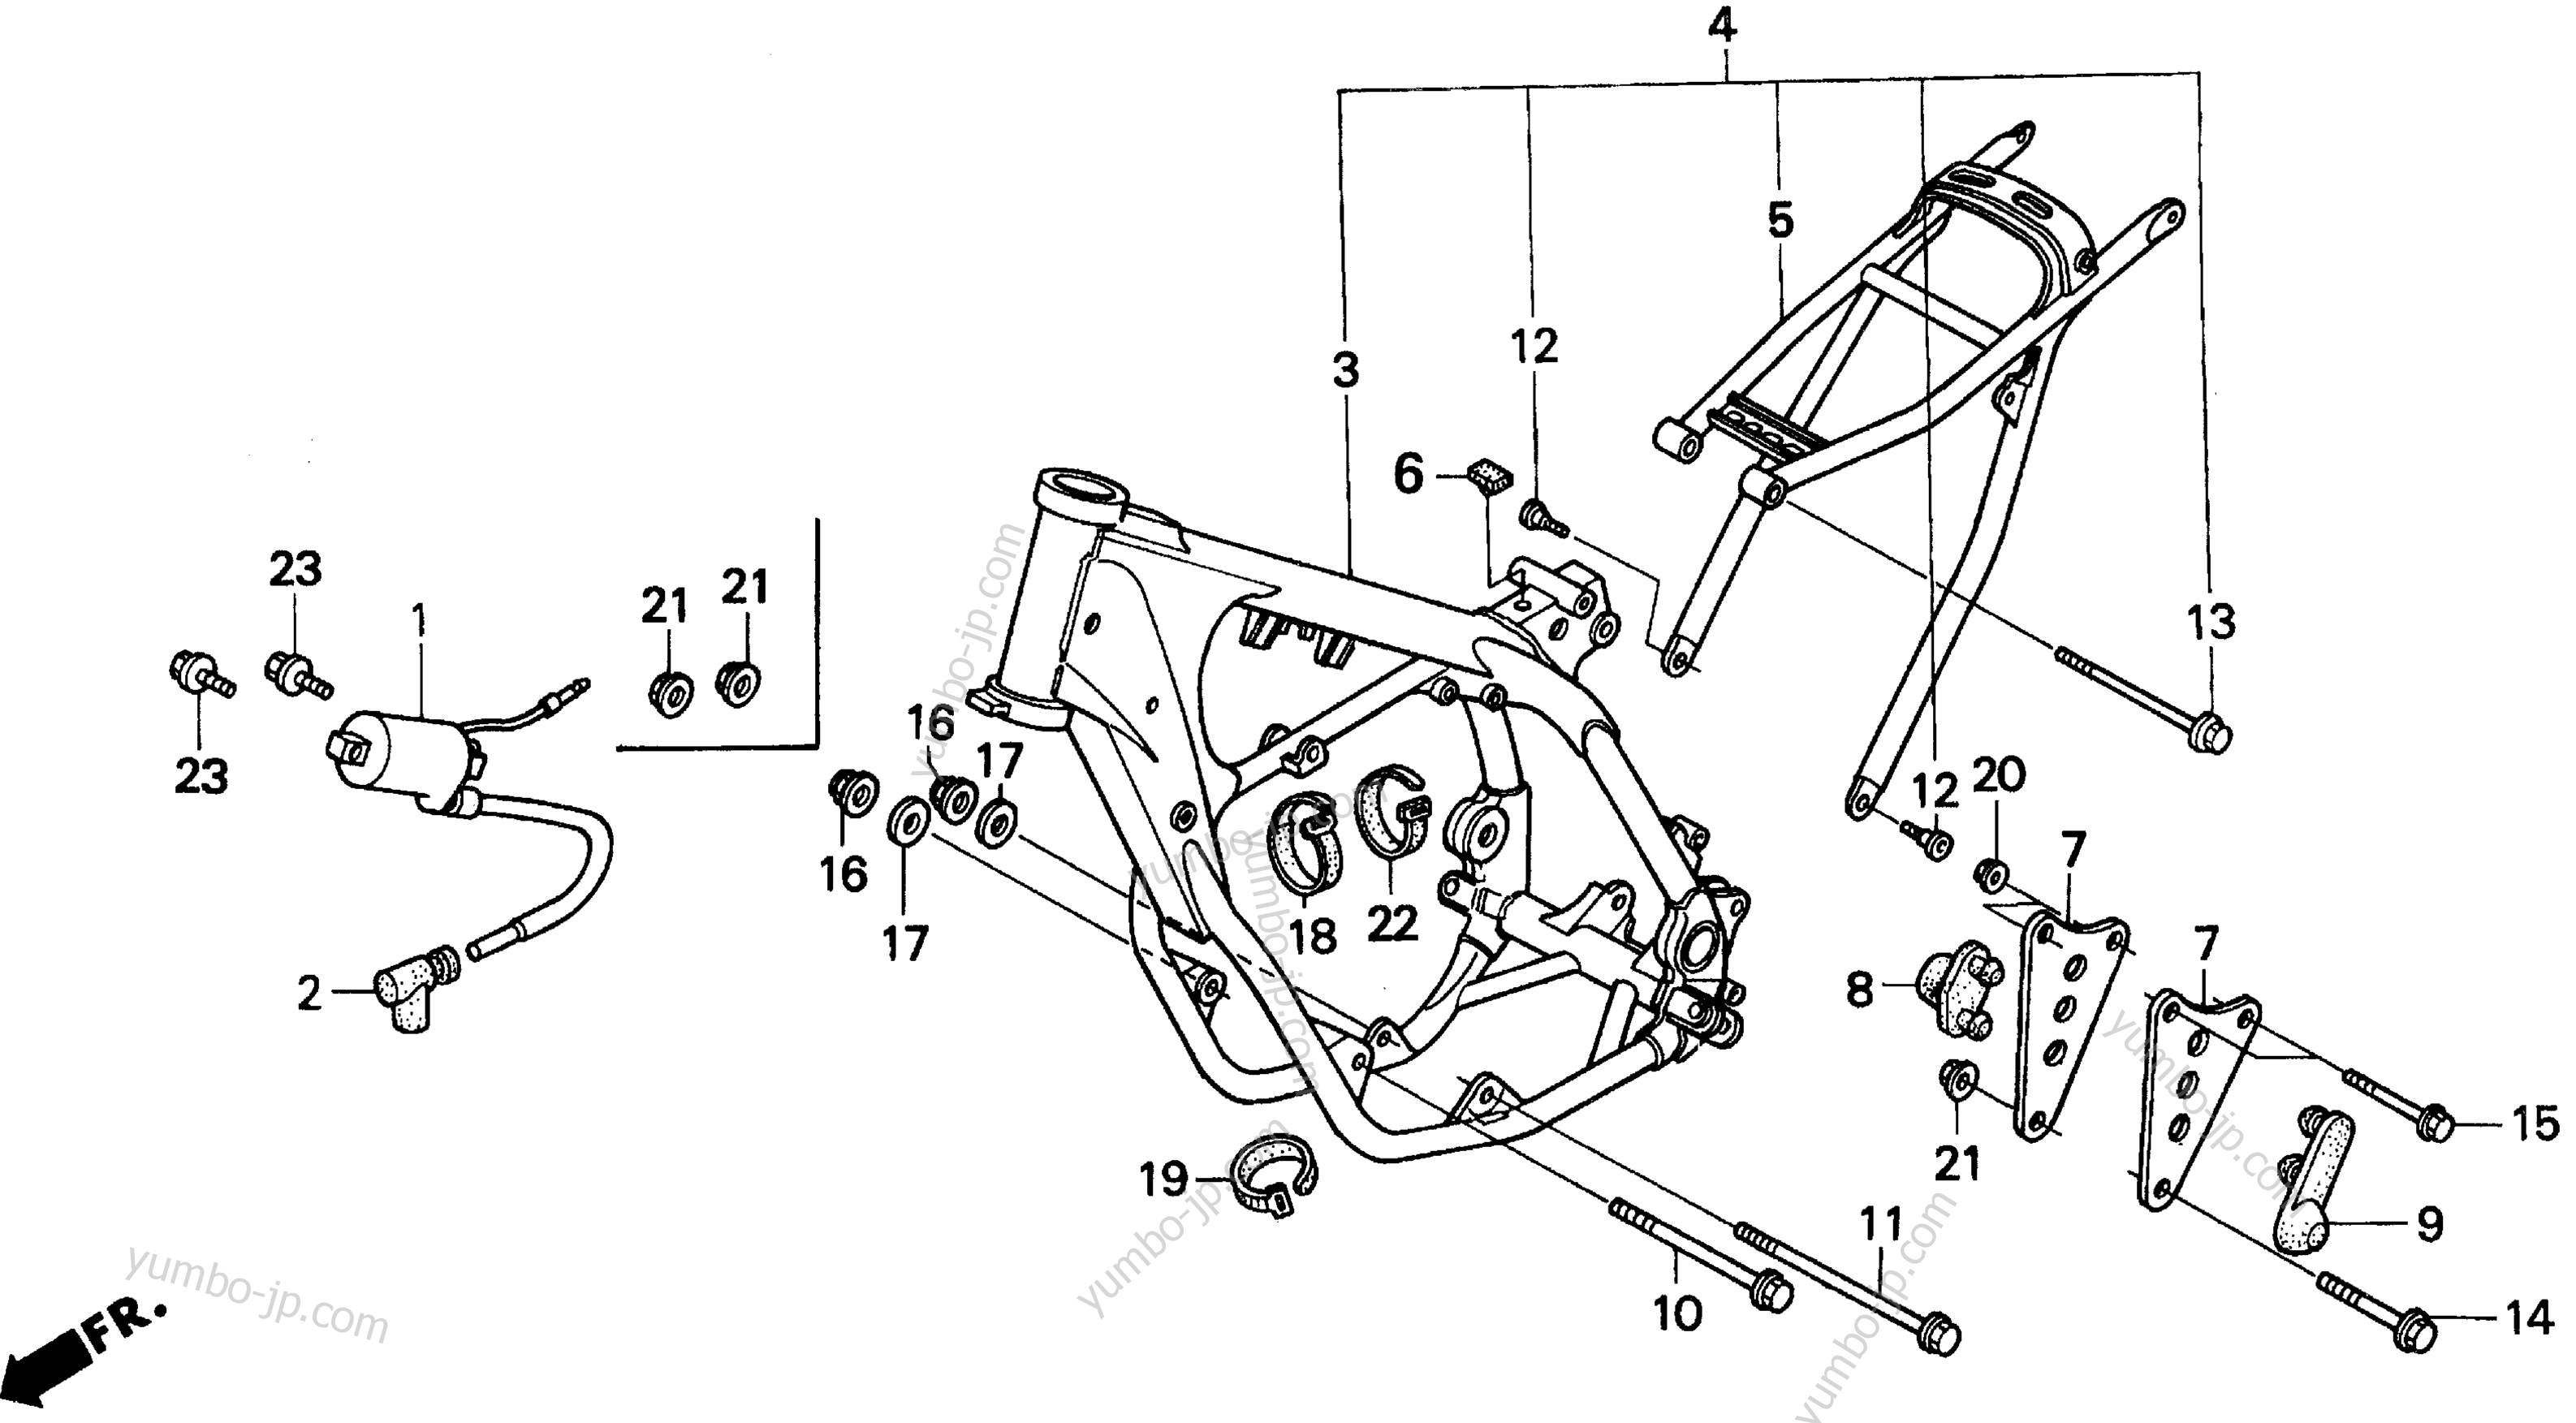 FRAME for motorcycles HONDA CR250R A 1993 year